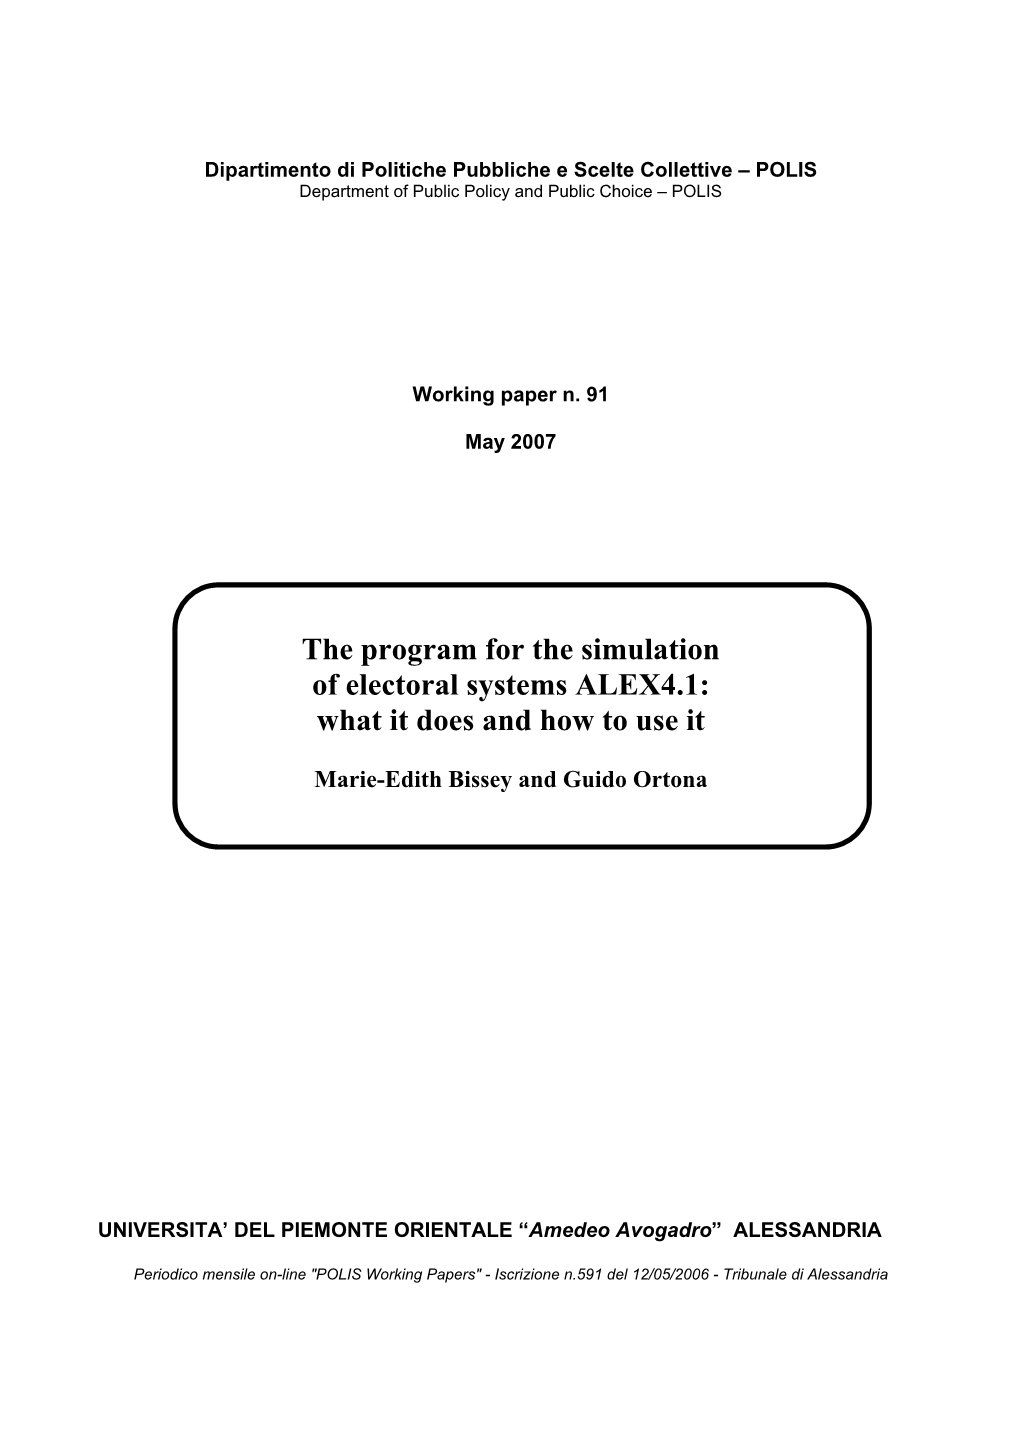 The Program for the Simulation of Electoral Systems ALEX4.1: What It Does and How to Use It